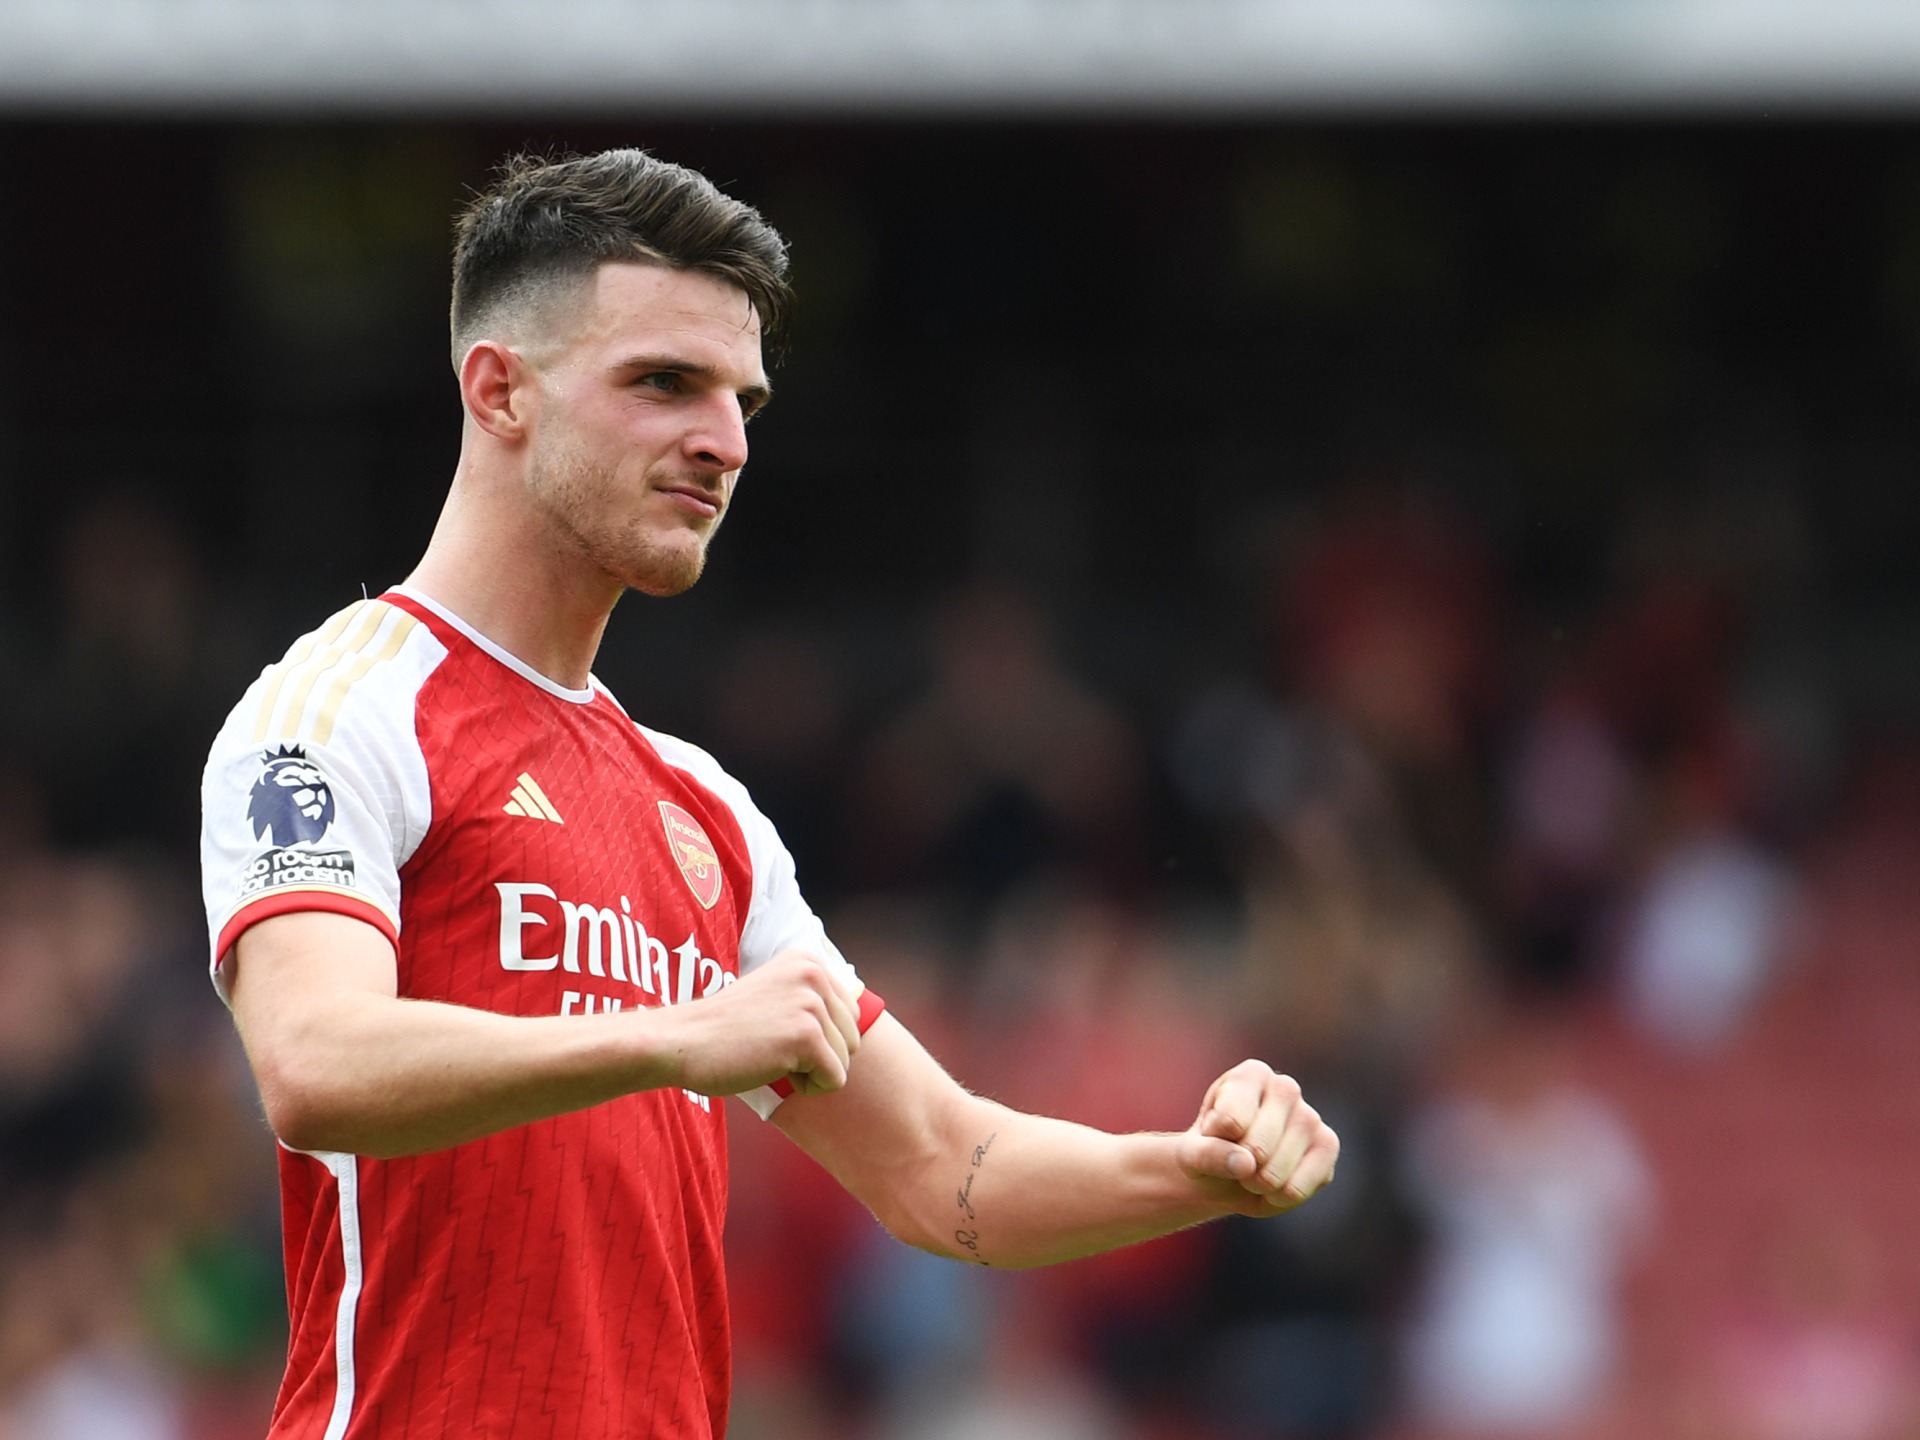 Declan Rice is Doing Very Well at Arsenal